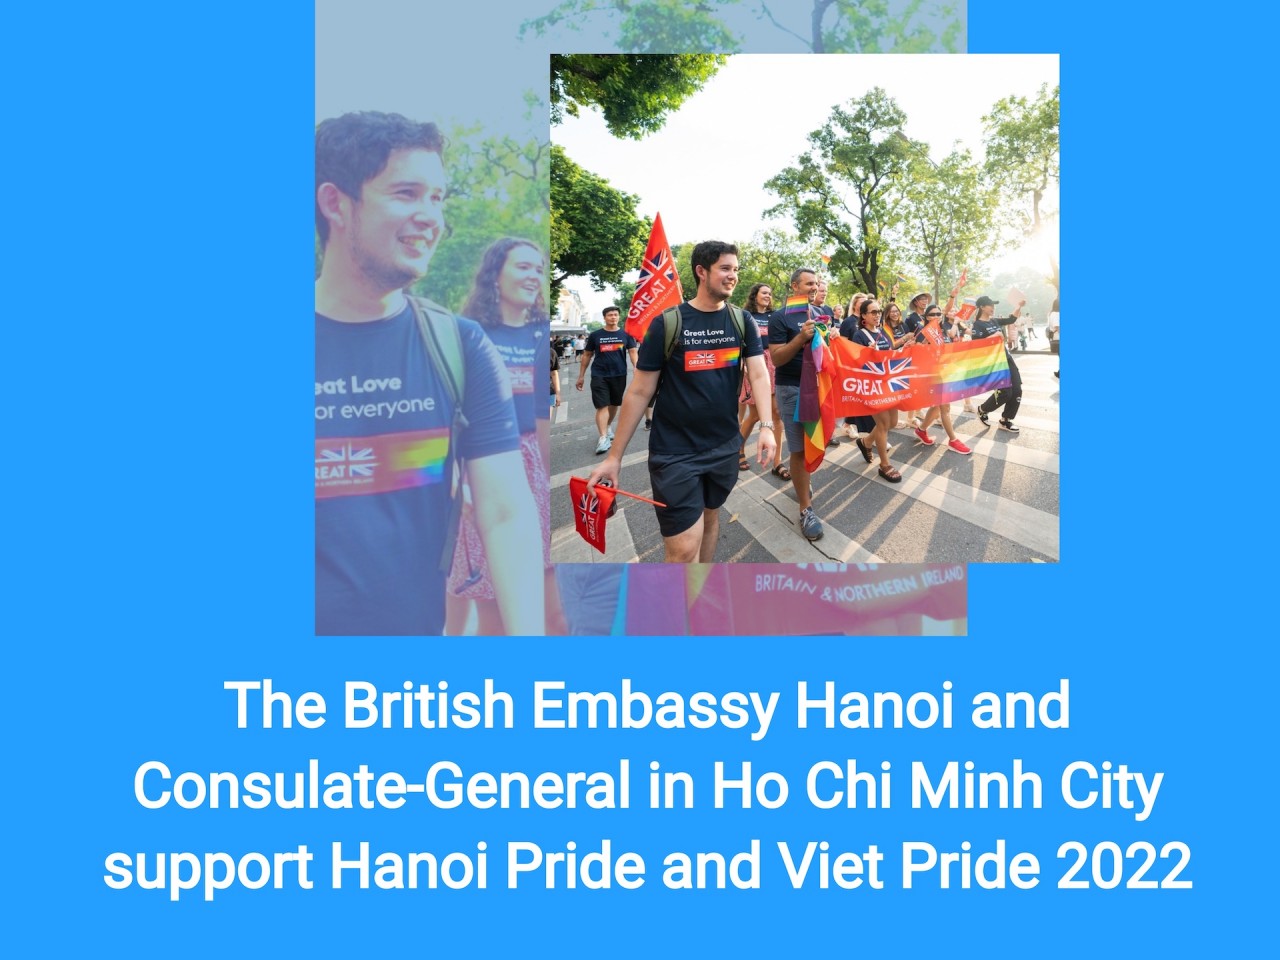 2022 - A Memorable Year for the UK - Vietnam Bilateral Relations